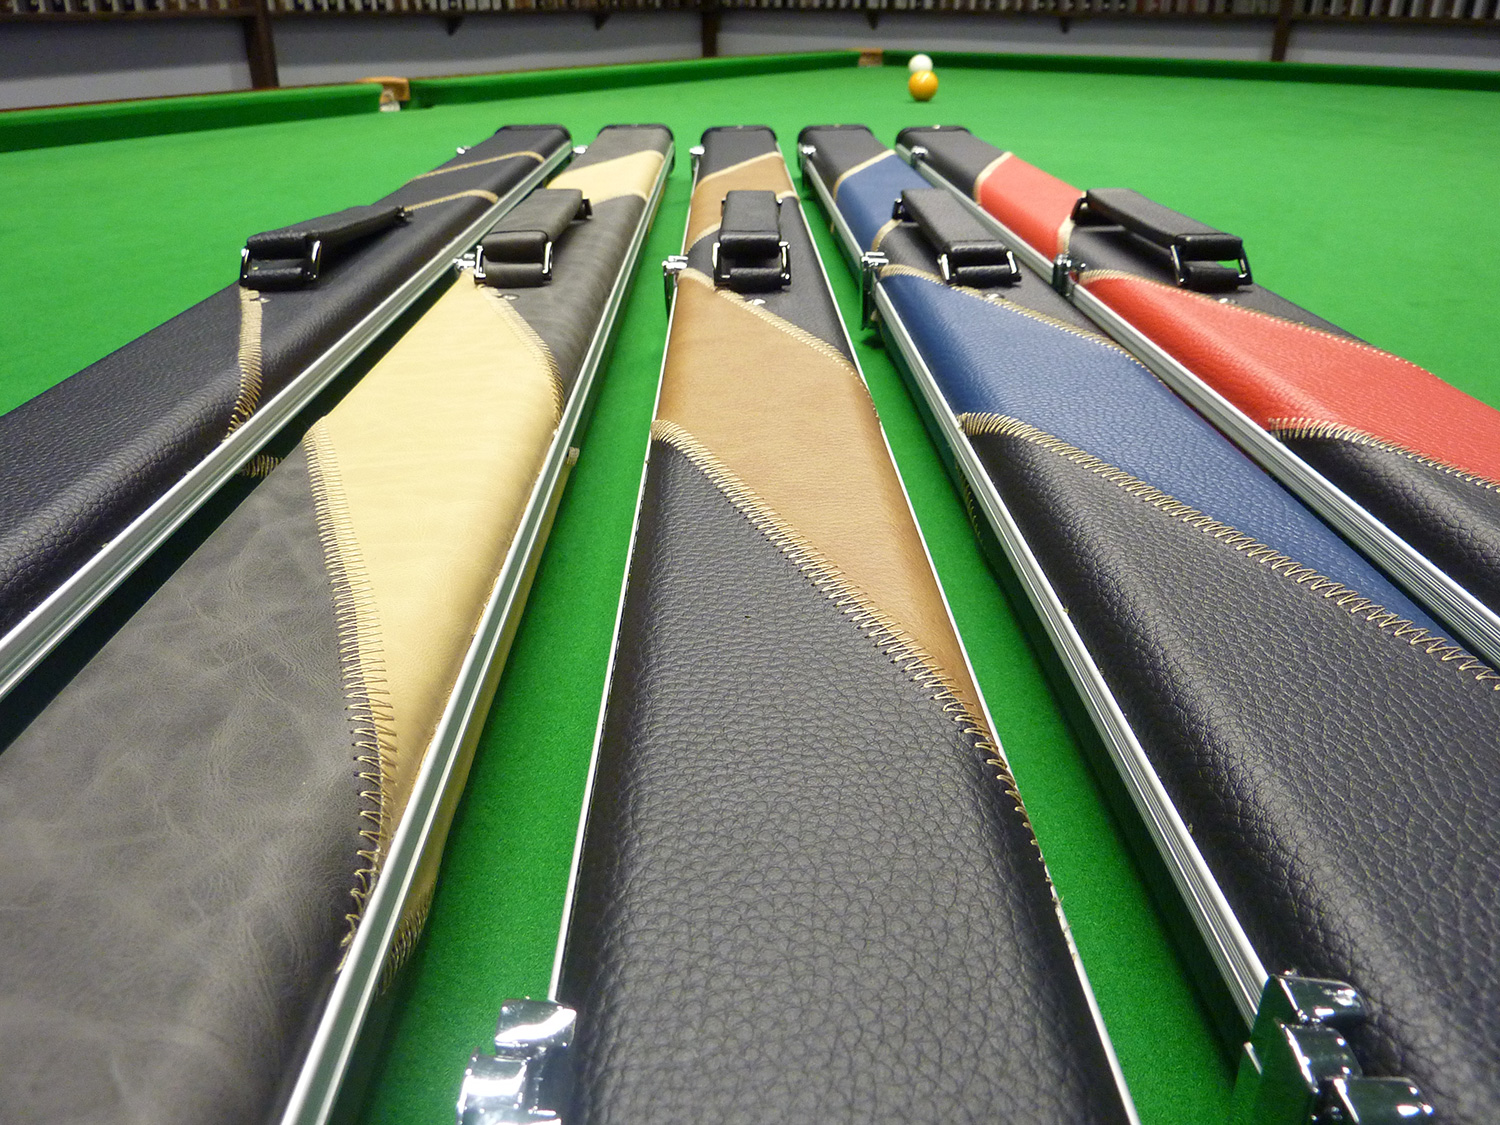 NEW QUALITY DELUXE ST ANDREW'S CROSS SNOOKER CUE CASE FOR 3/4 JOINTED CUE 